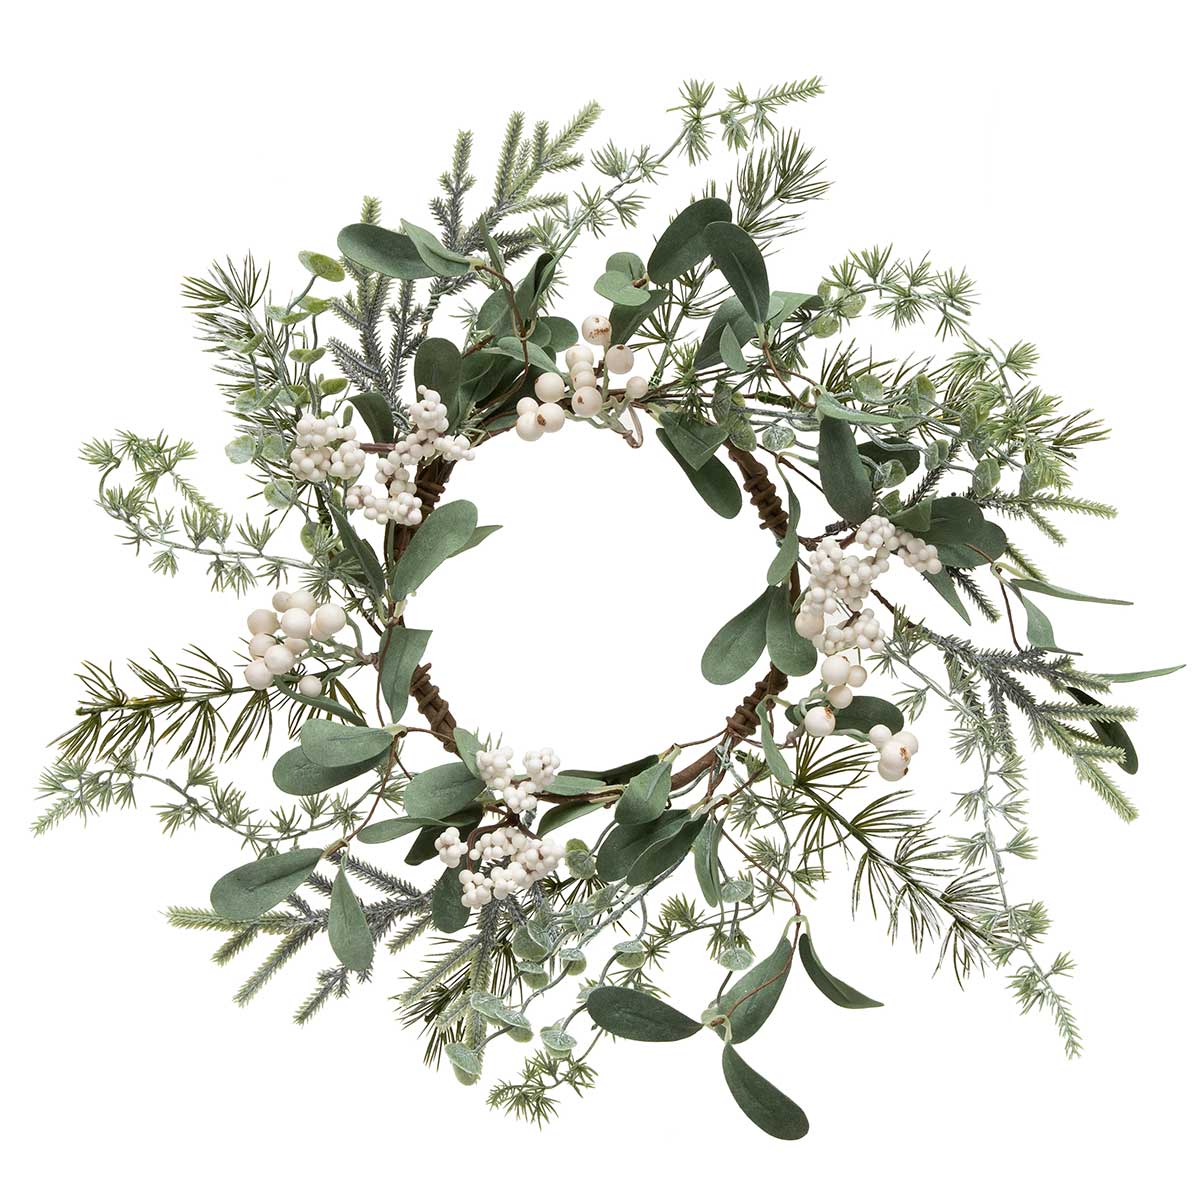 !WINTER BERRY AND MIXED WREATH 16"